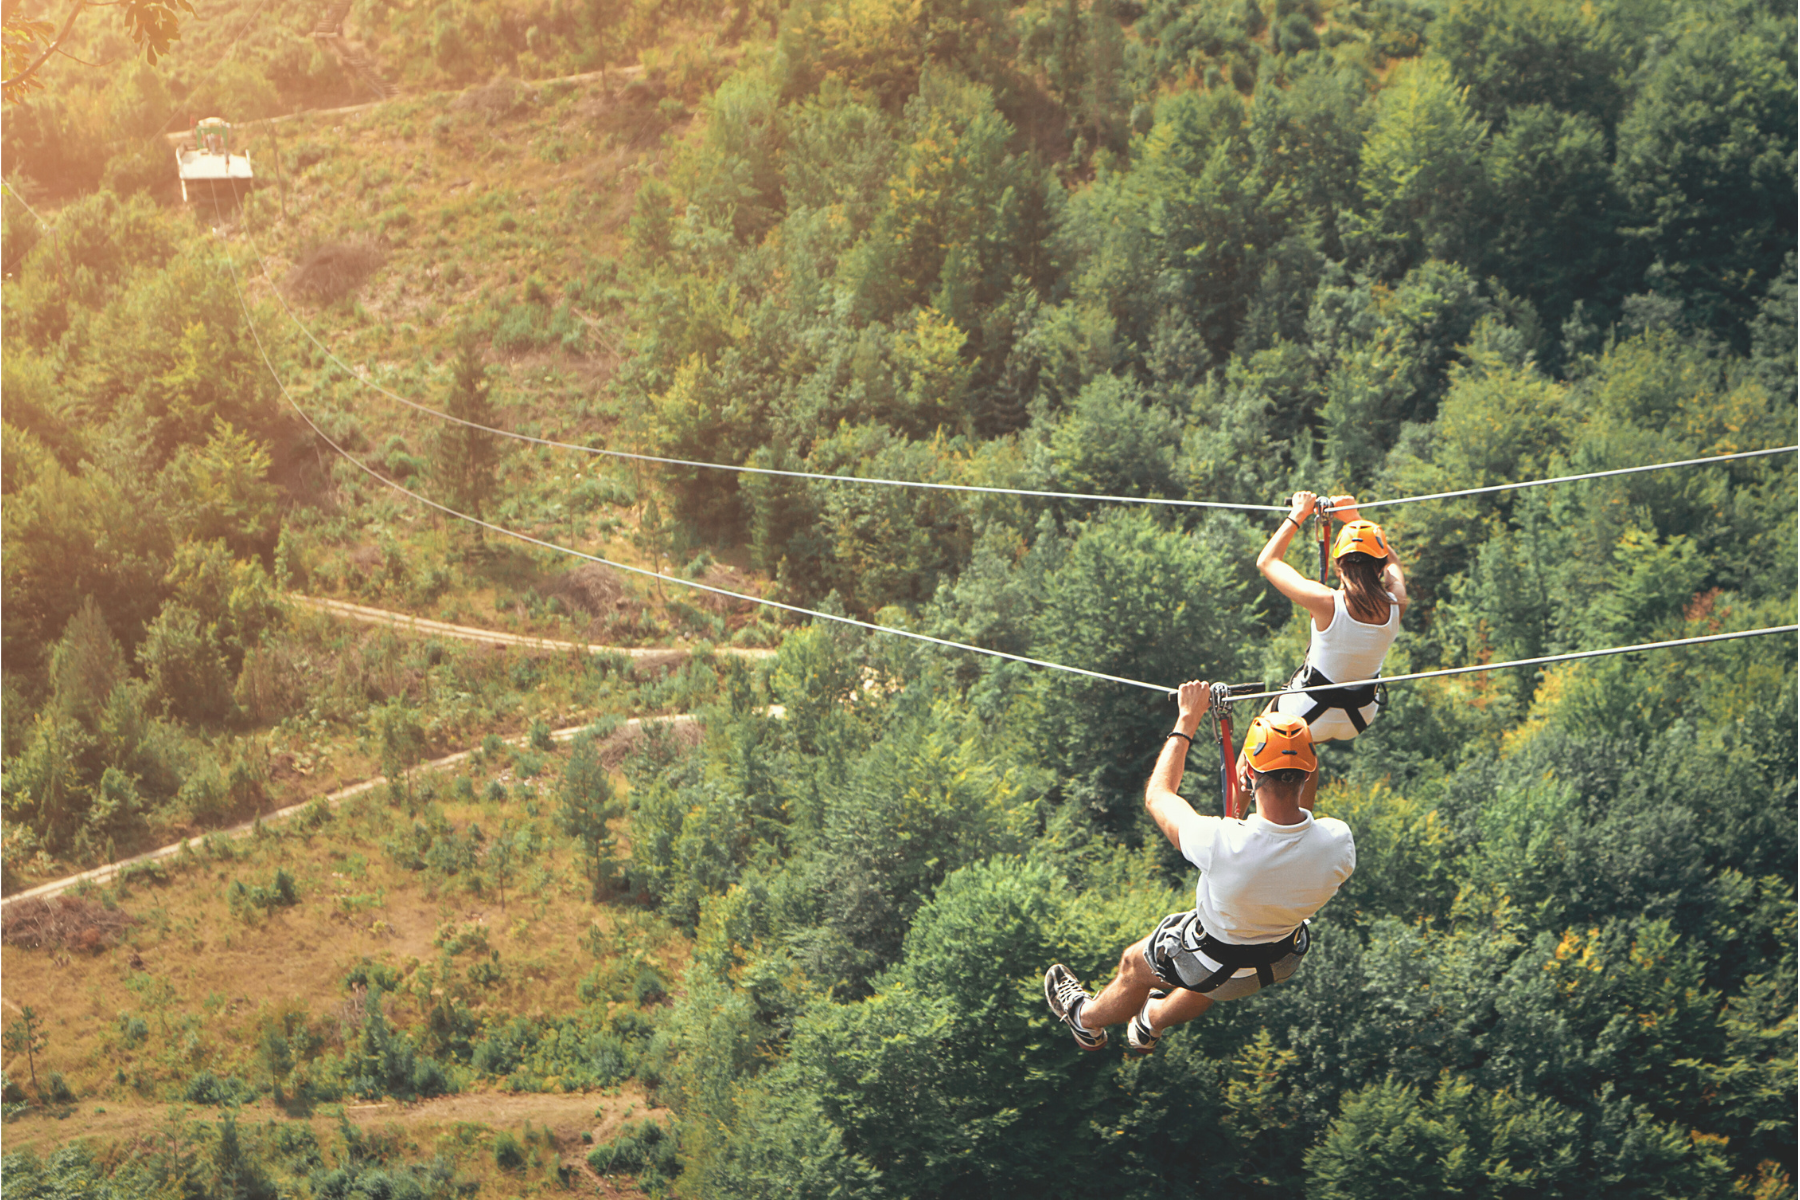 Couple zip-lining over a farm